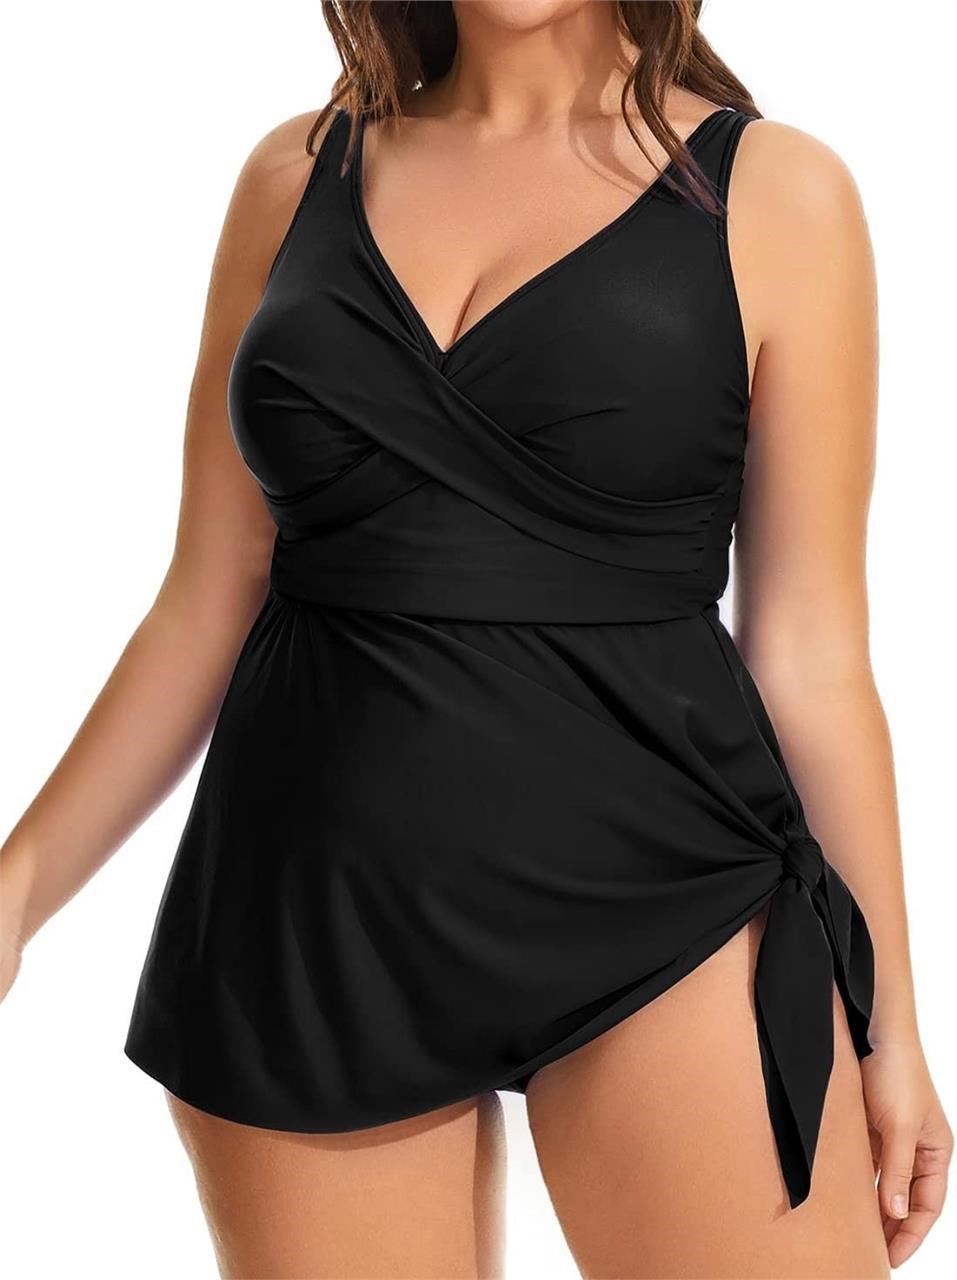 12W Daci Plus Size One Piece Swimsuits for Women